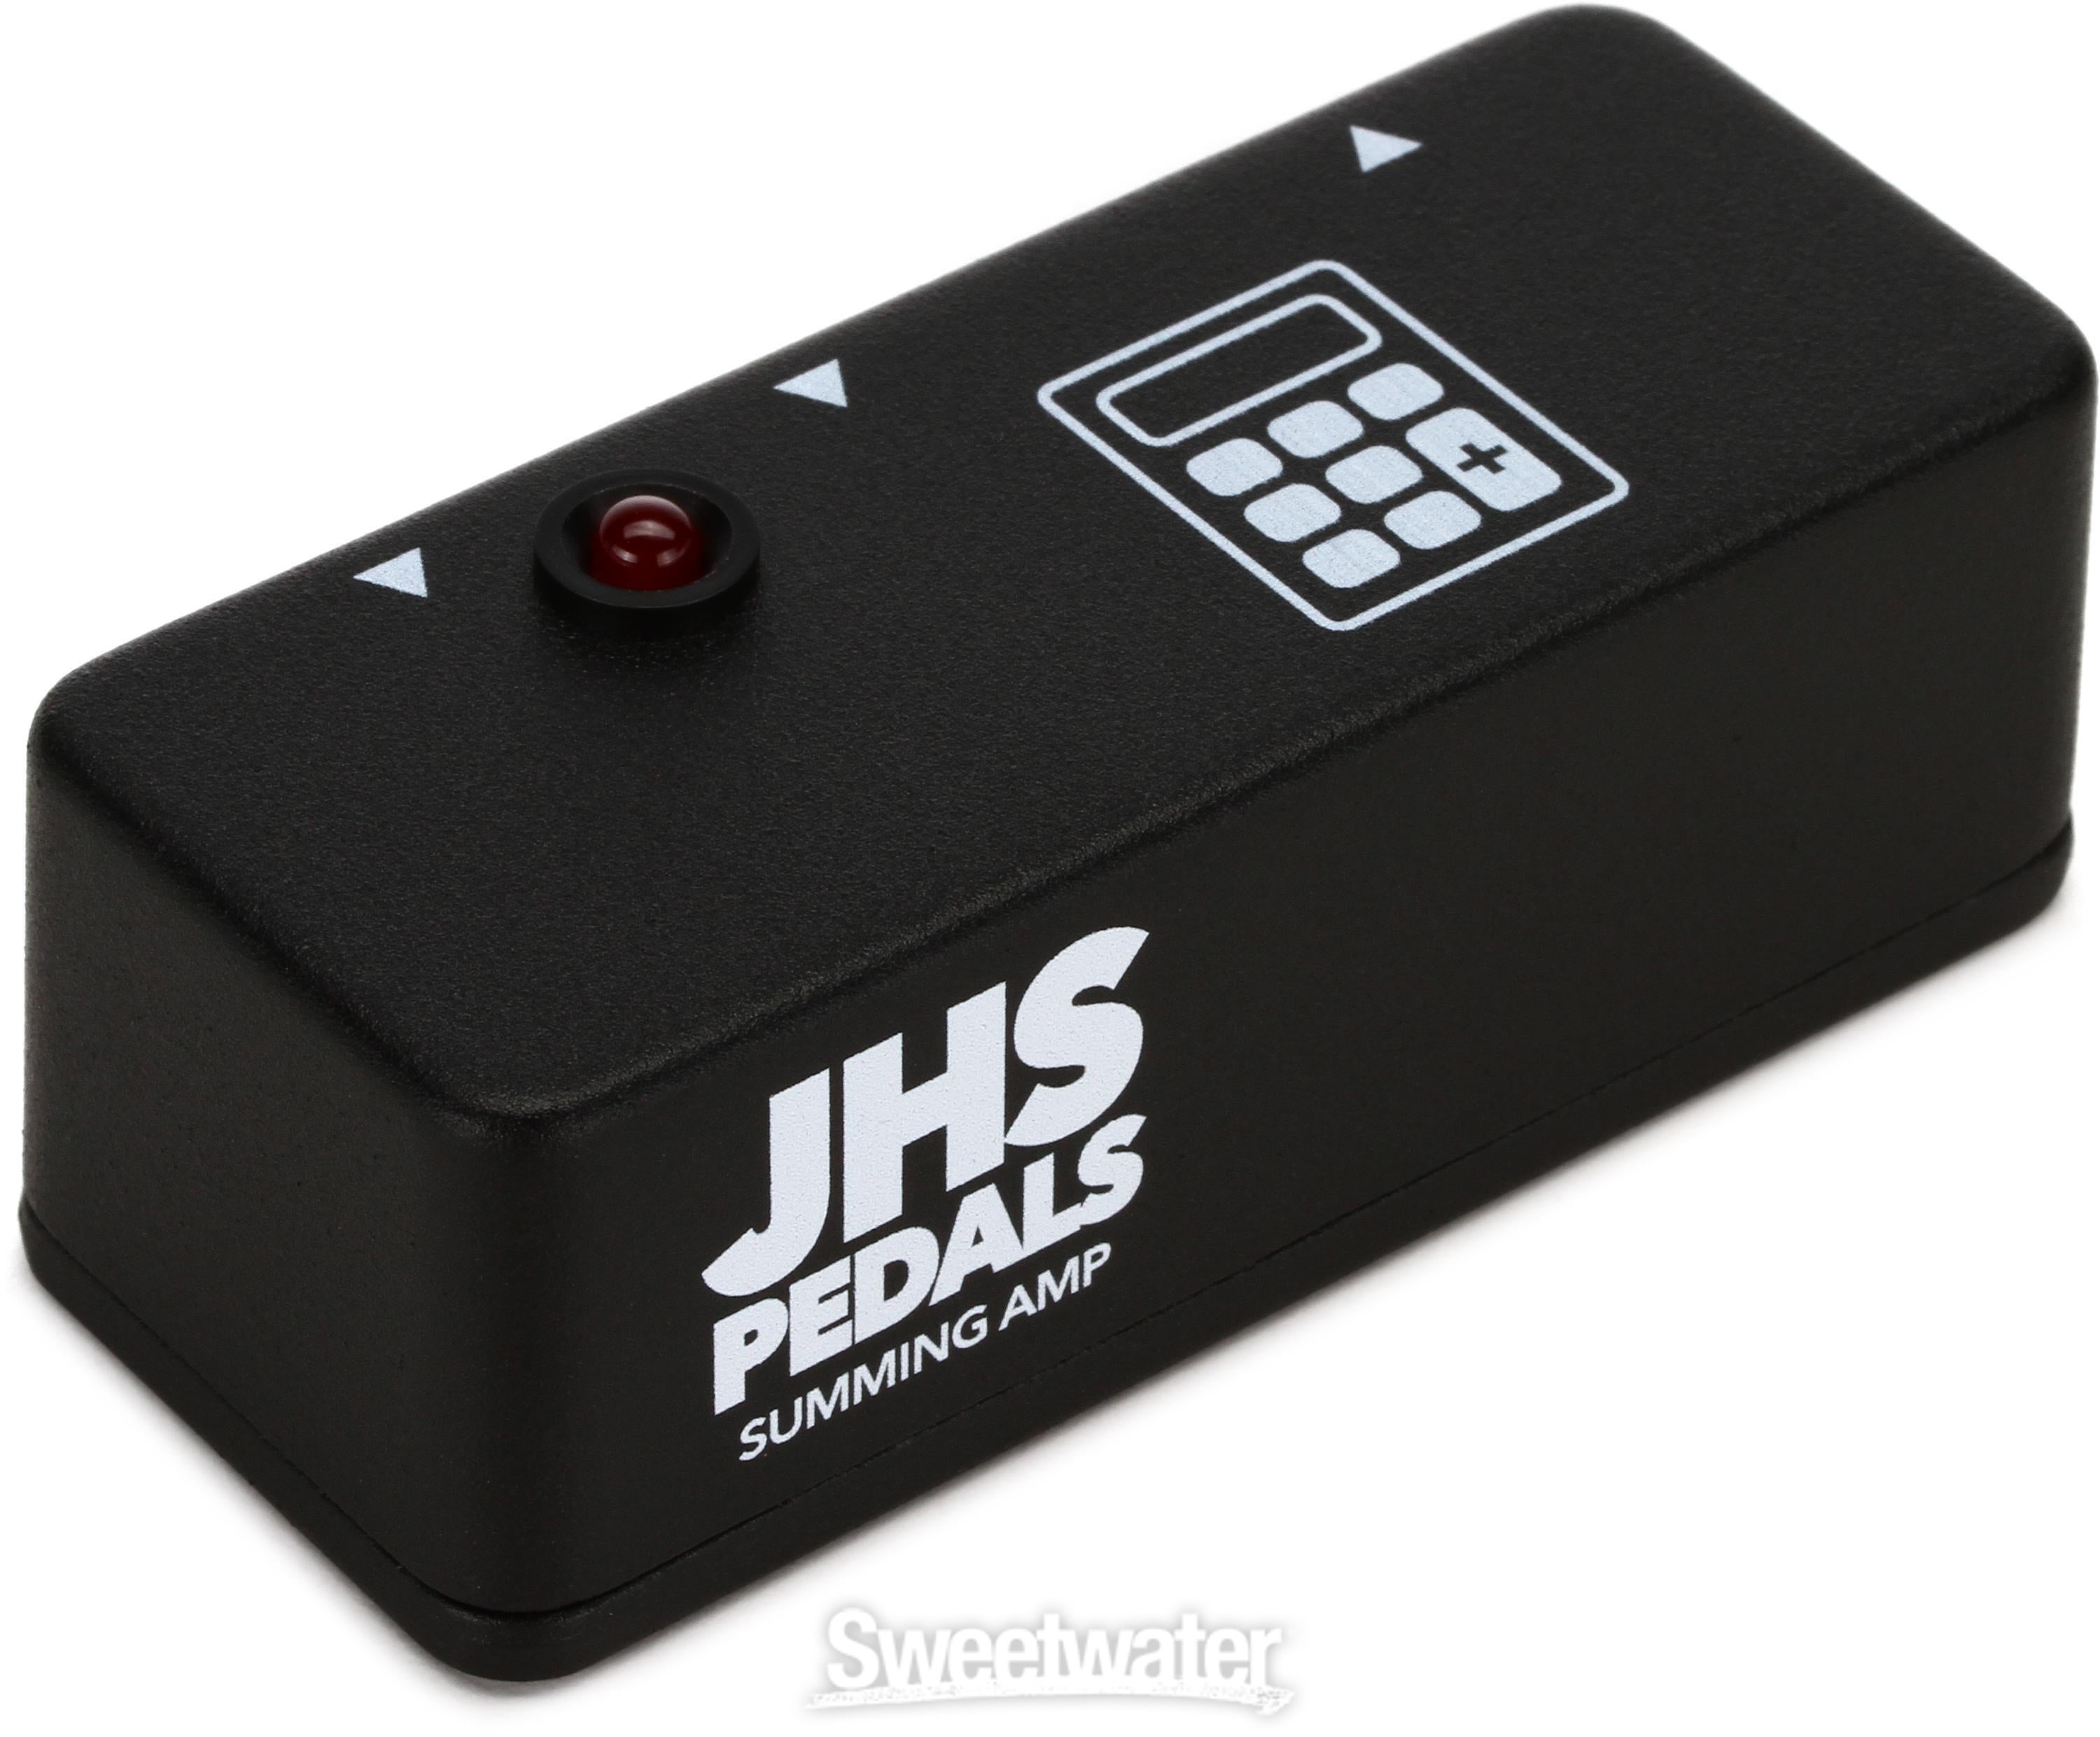 JHS Summing Amp Utility Pedal | Sweetwater